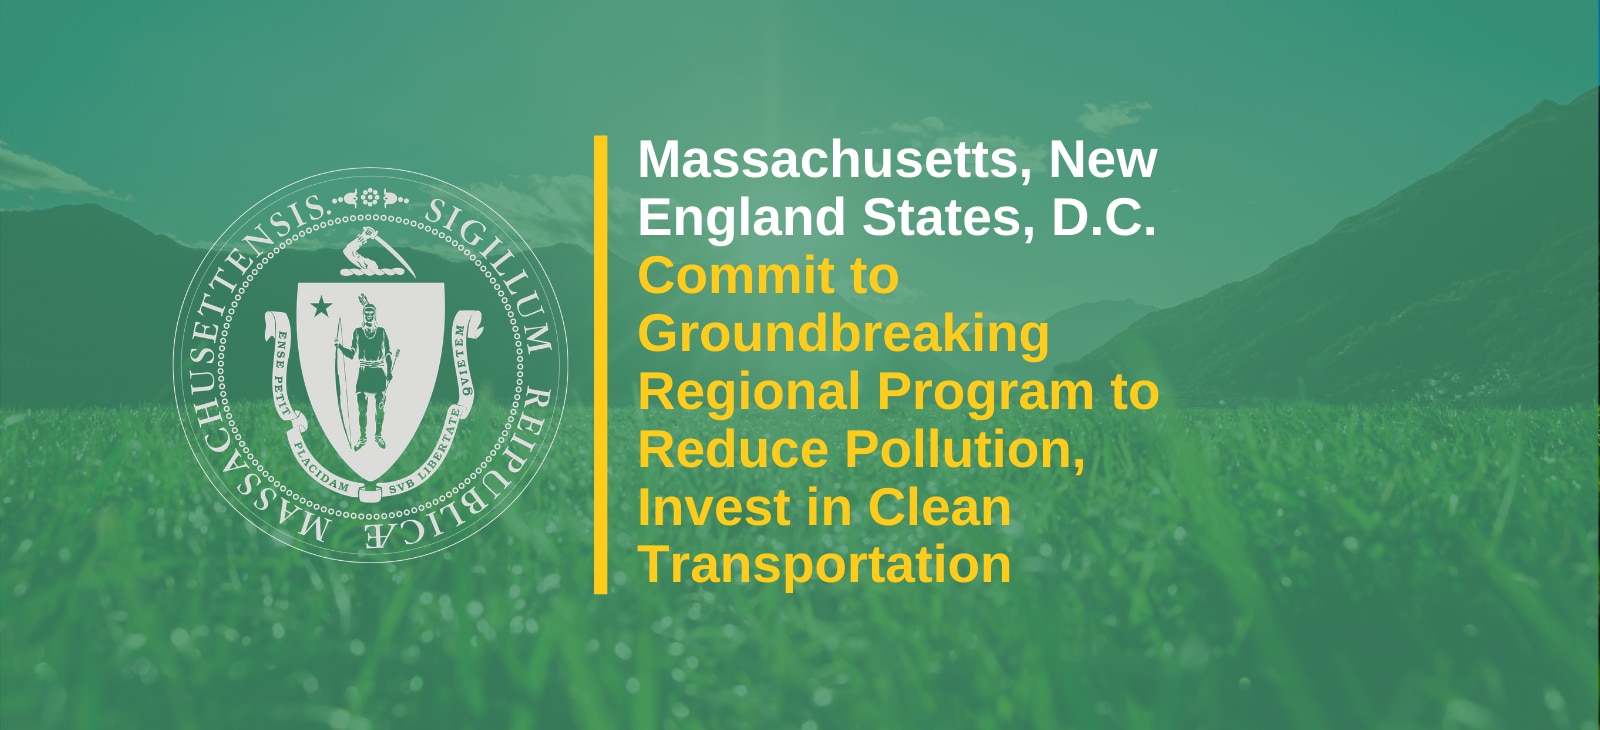 Massachusetts, New England States, and D.C. Commit to Groundbreaking Regional Program to Reduce Pollution, Invest in Clean Transportation